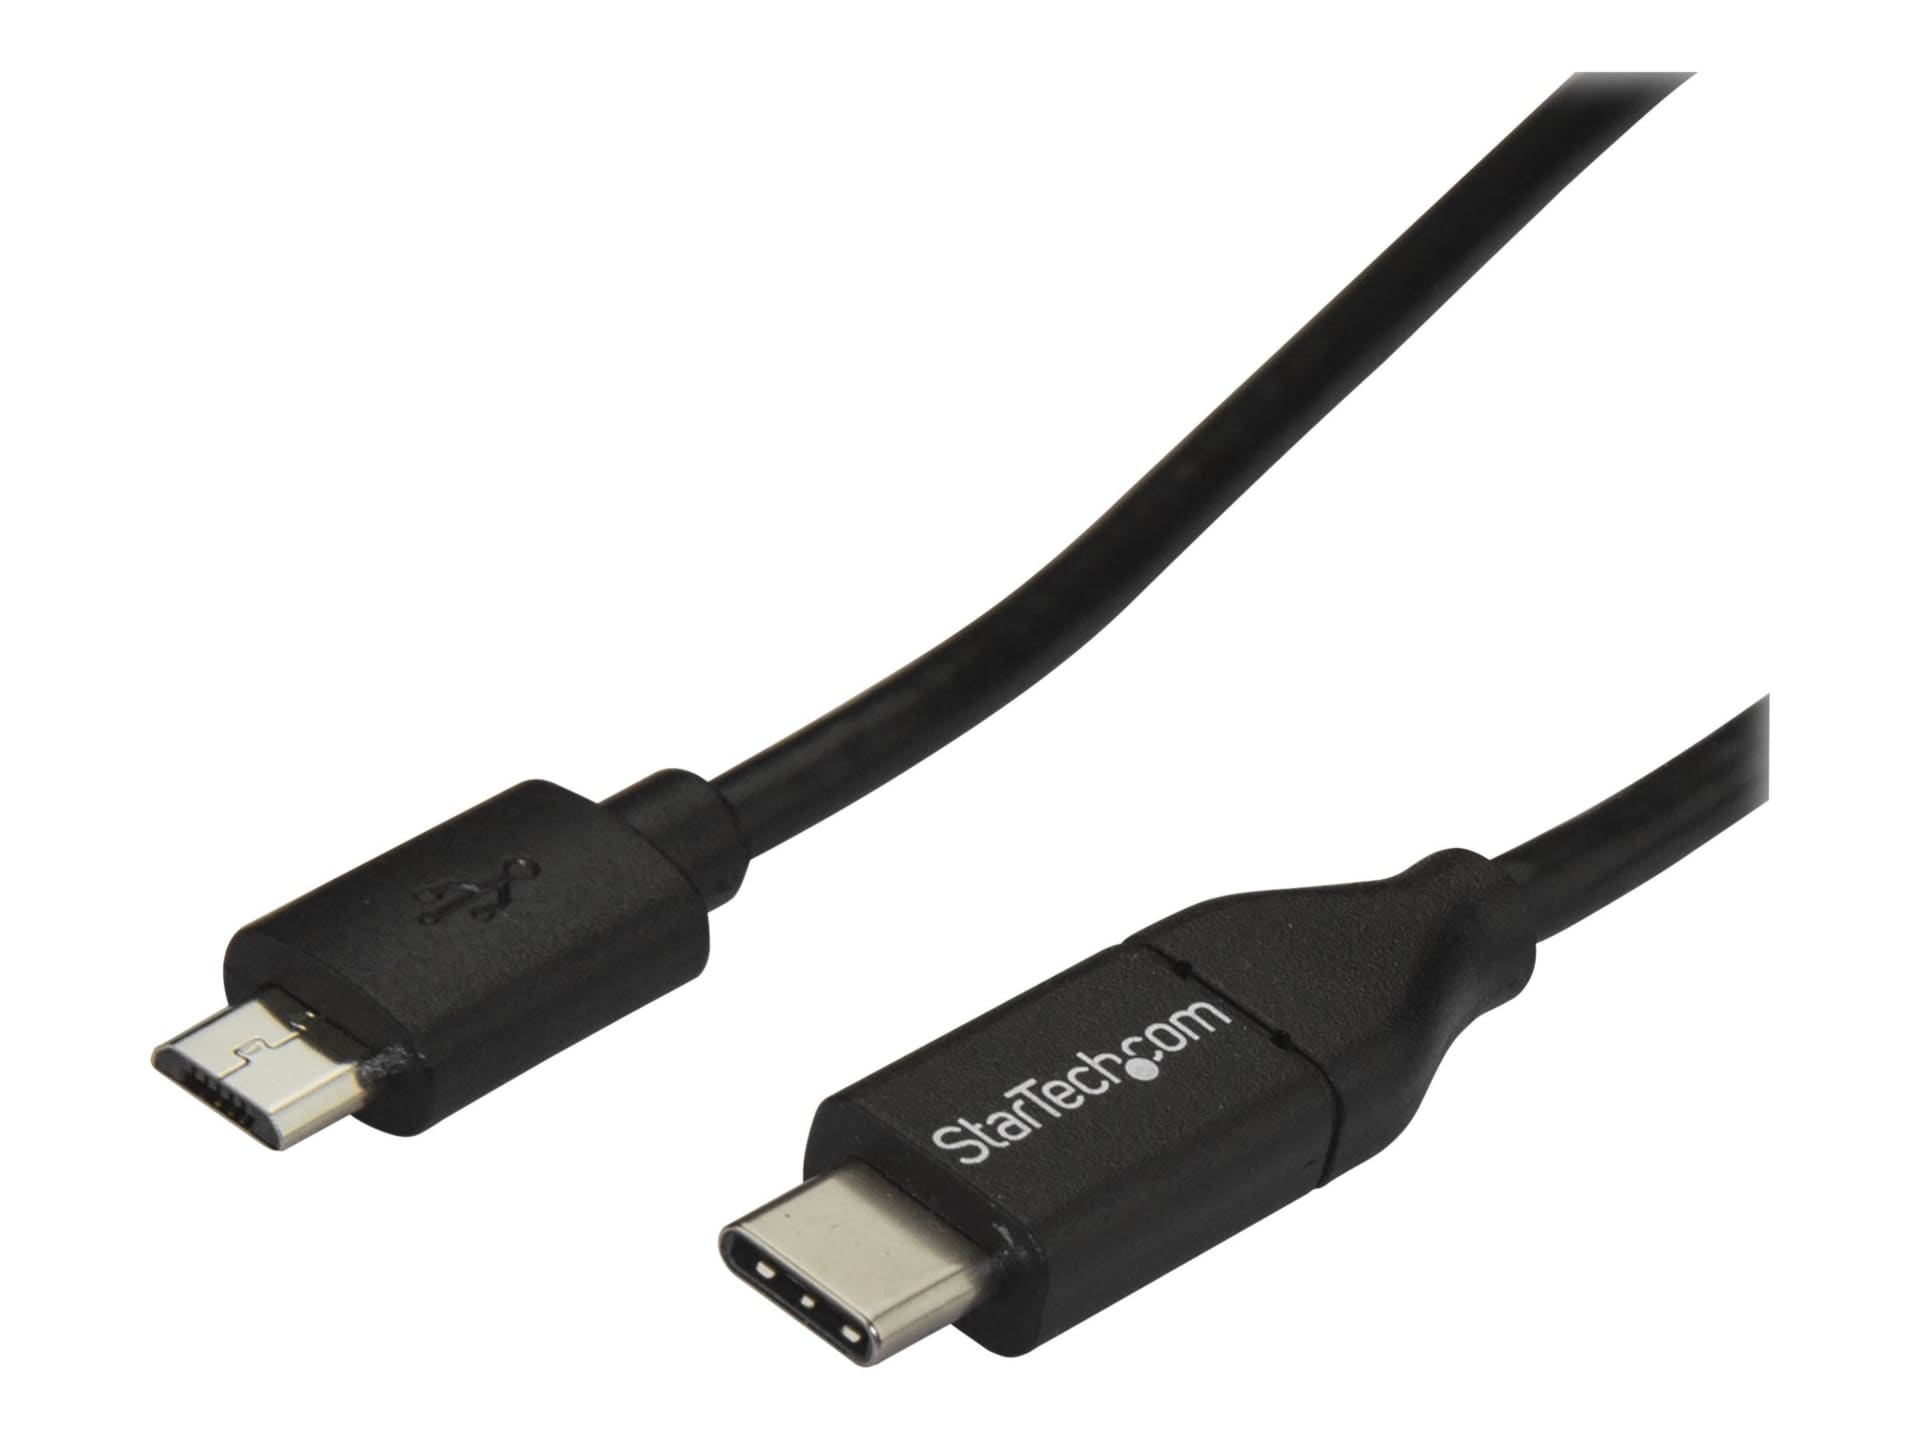 StarTech.com 2m 6 ft USB C to Micro USB Cable - M/M - USB 2.0 - USB-C to Micro USB Charge Cable - USB 2.0 Type C to